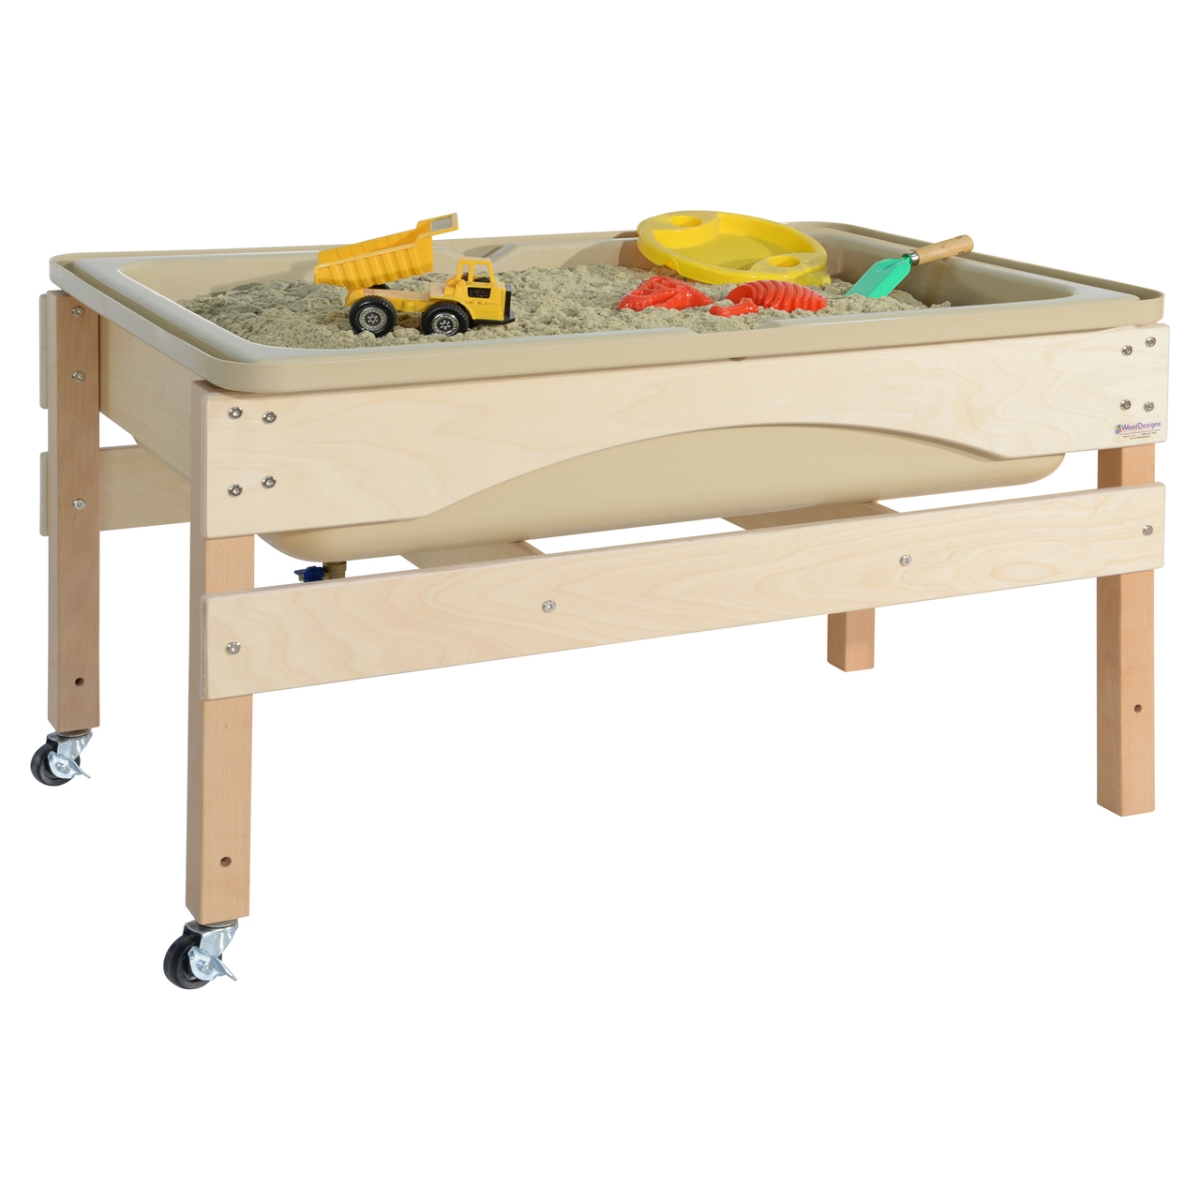 11835tn Absolute Best Sand & Water Sensory Center Without Lid